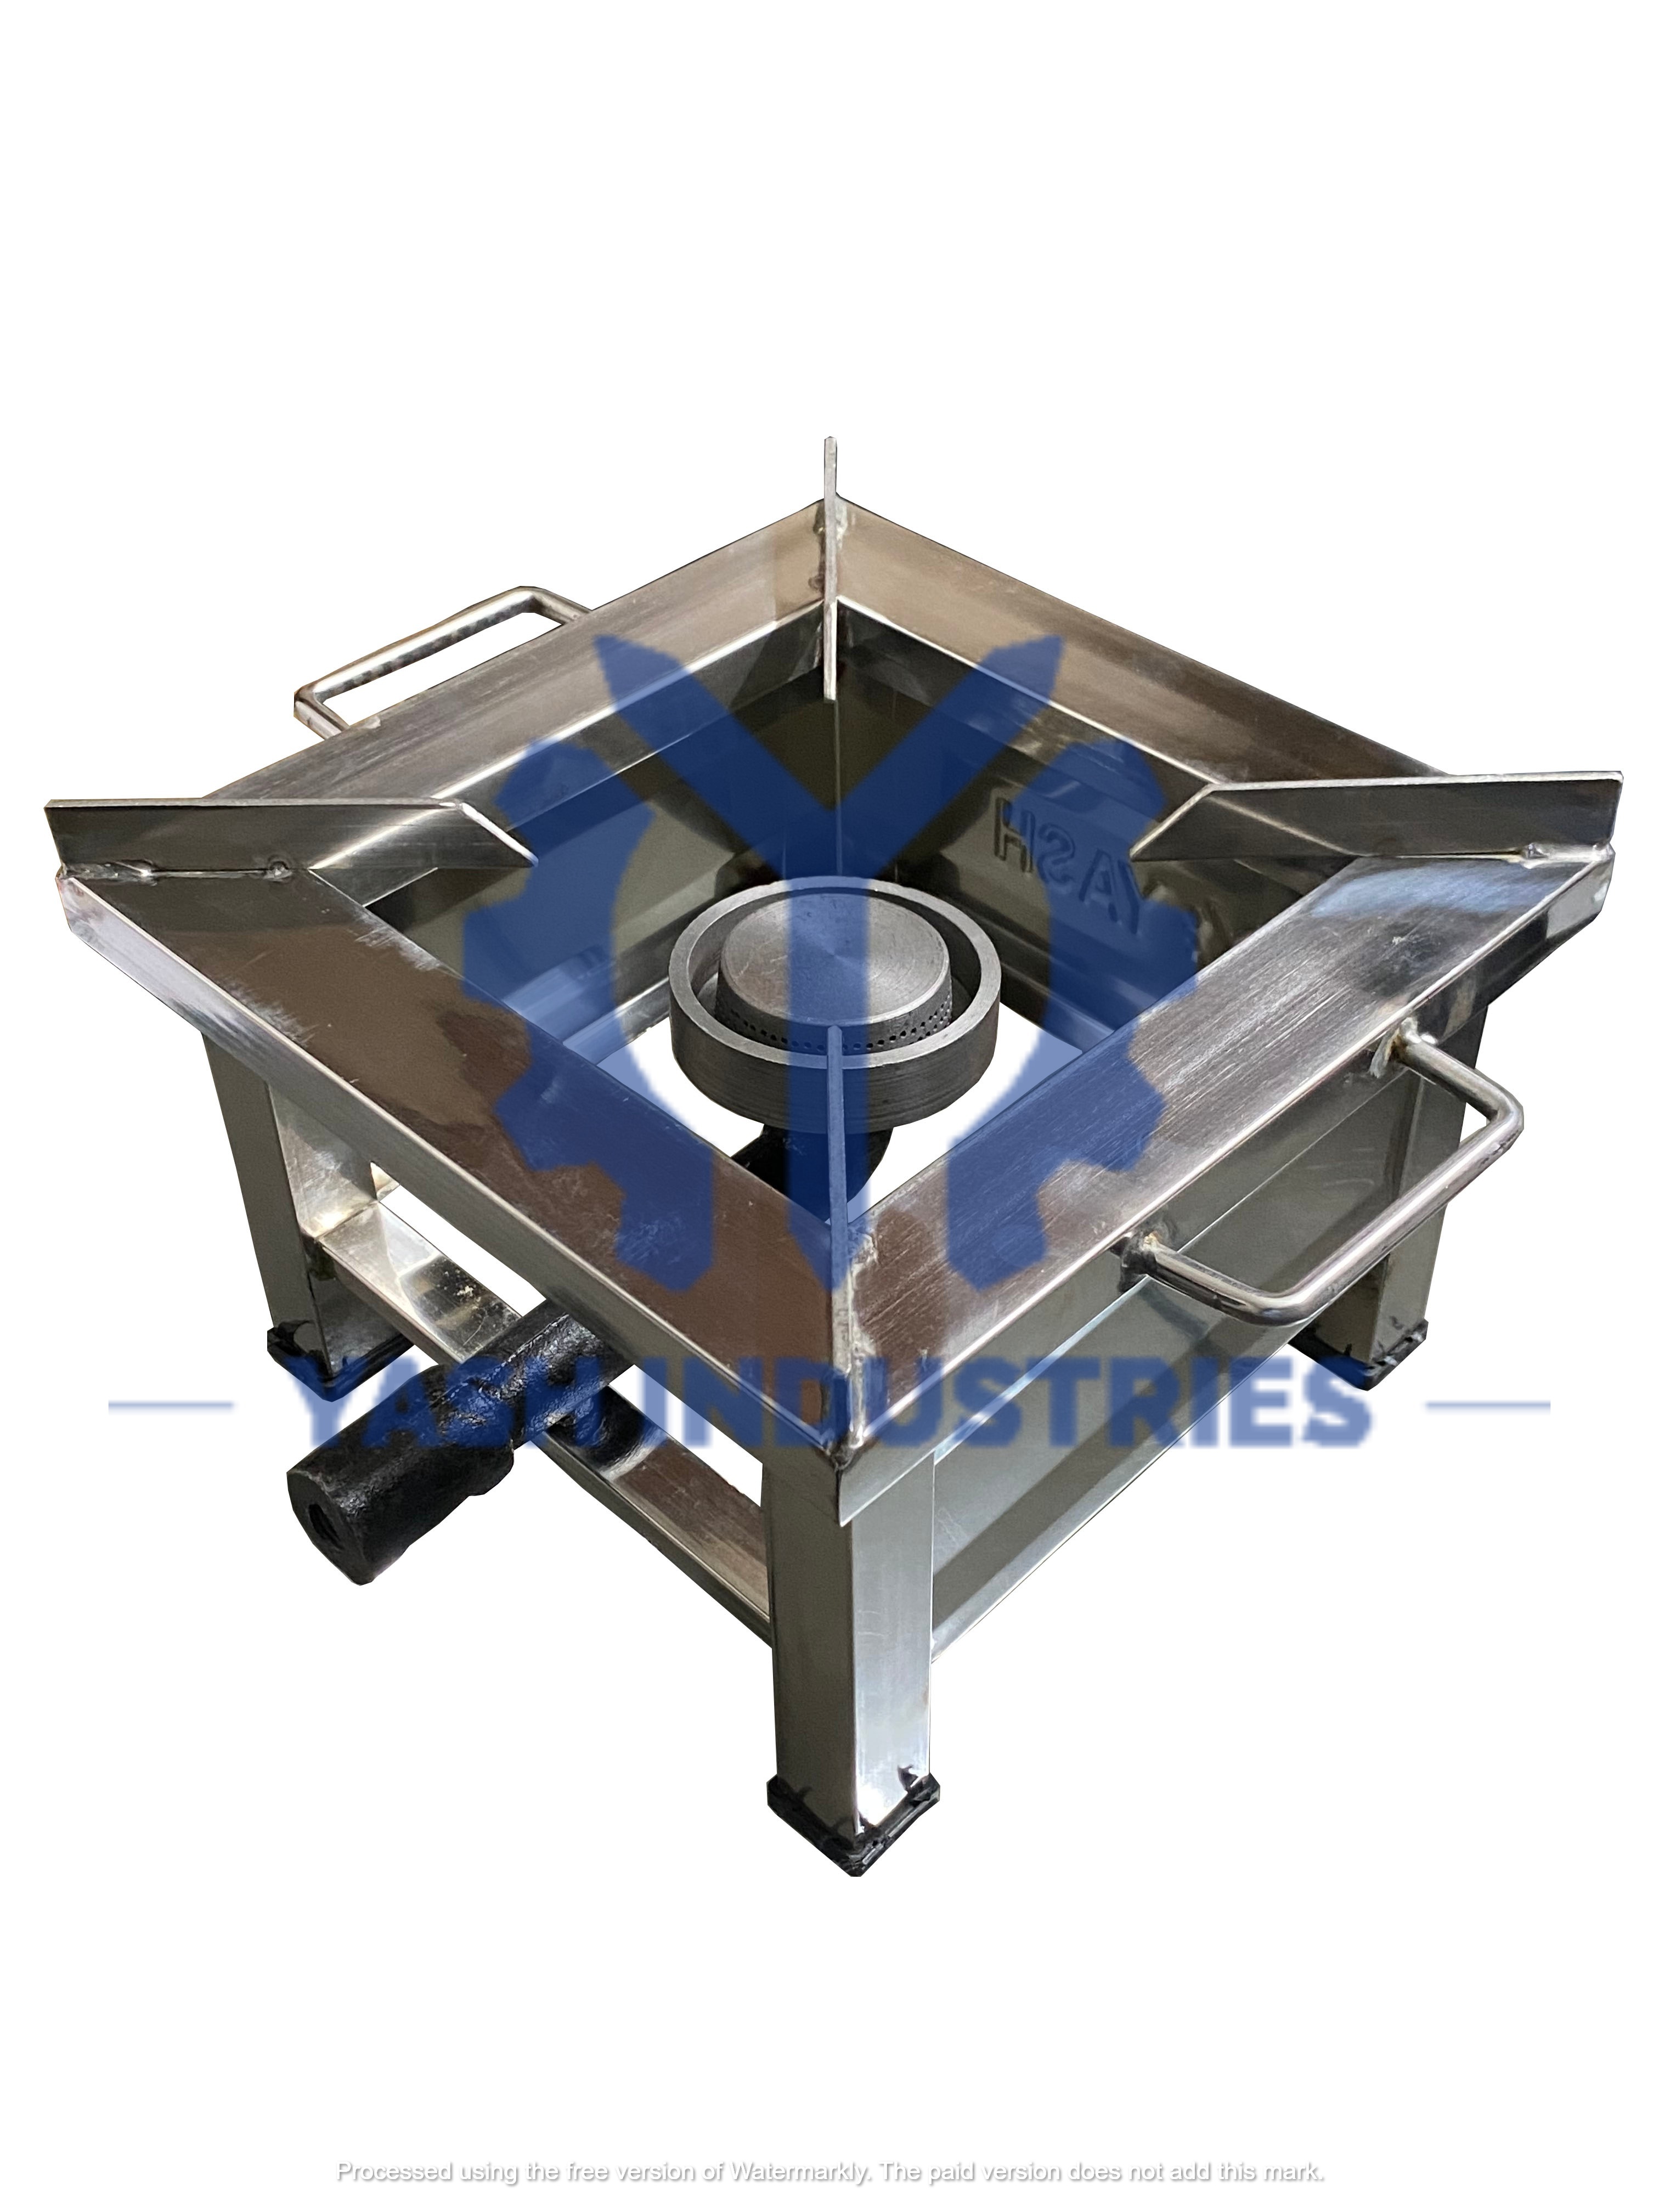 10 x 10 x 7 Stainless Steel  Normal Gas Stove/Gas Bhatti/Gas Chula